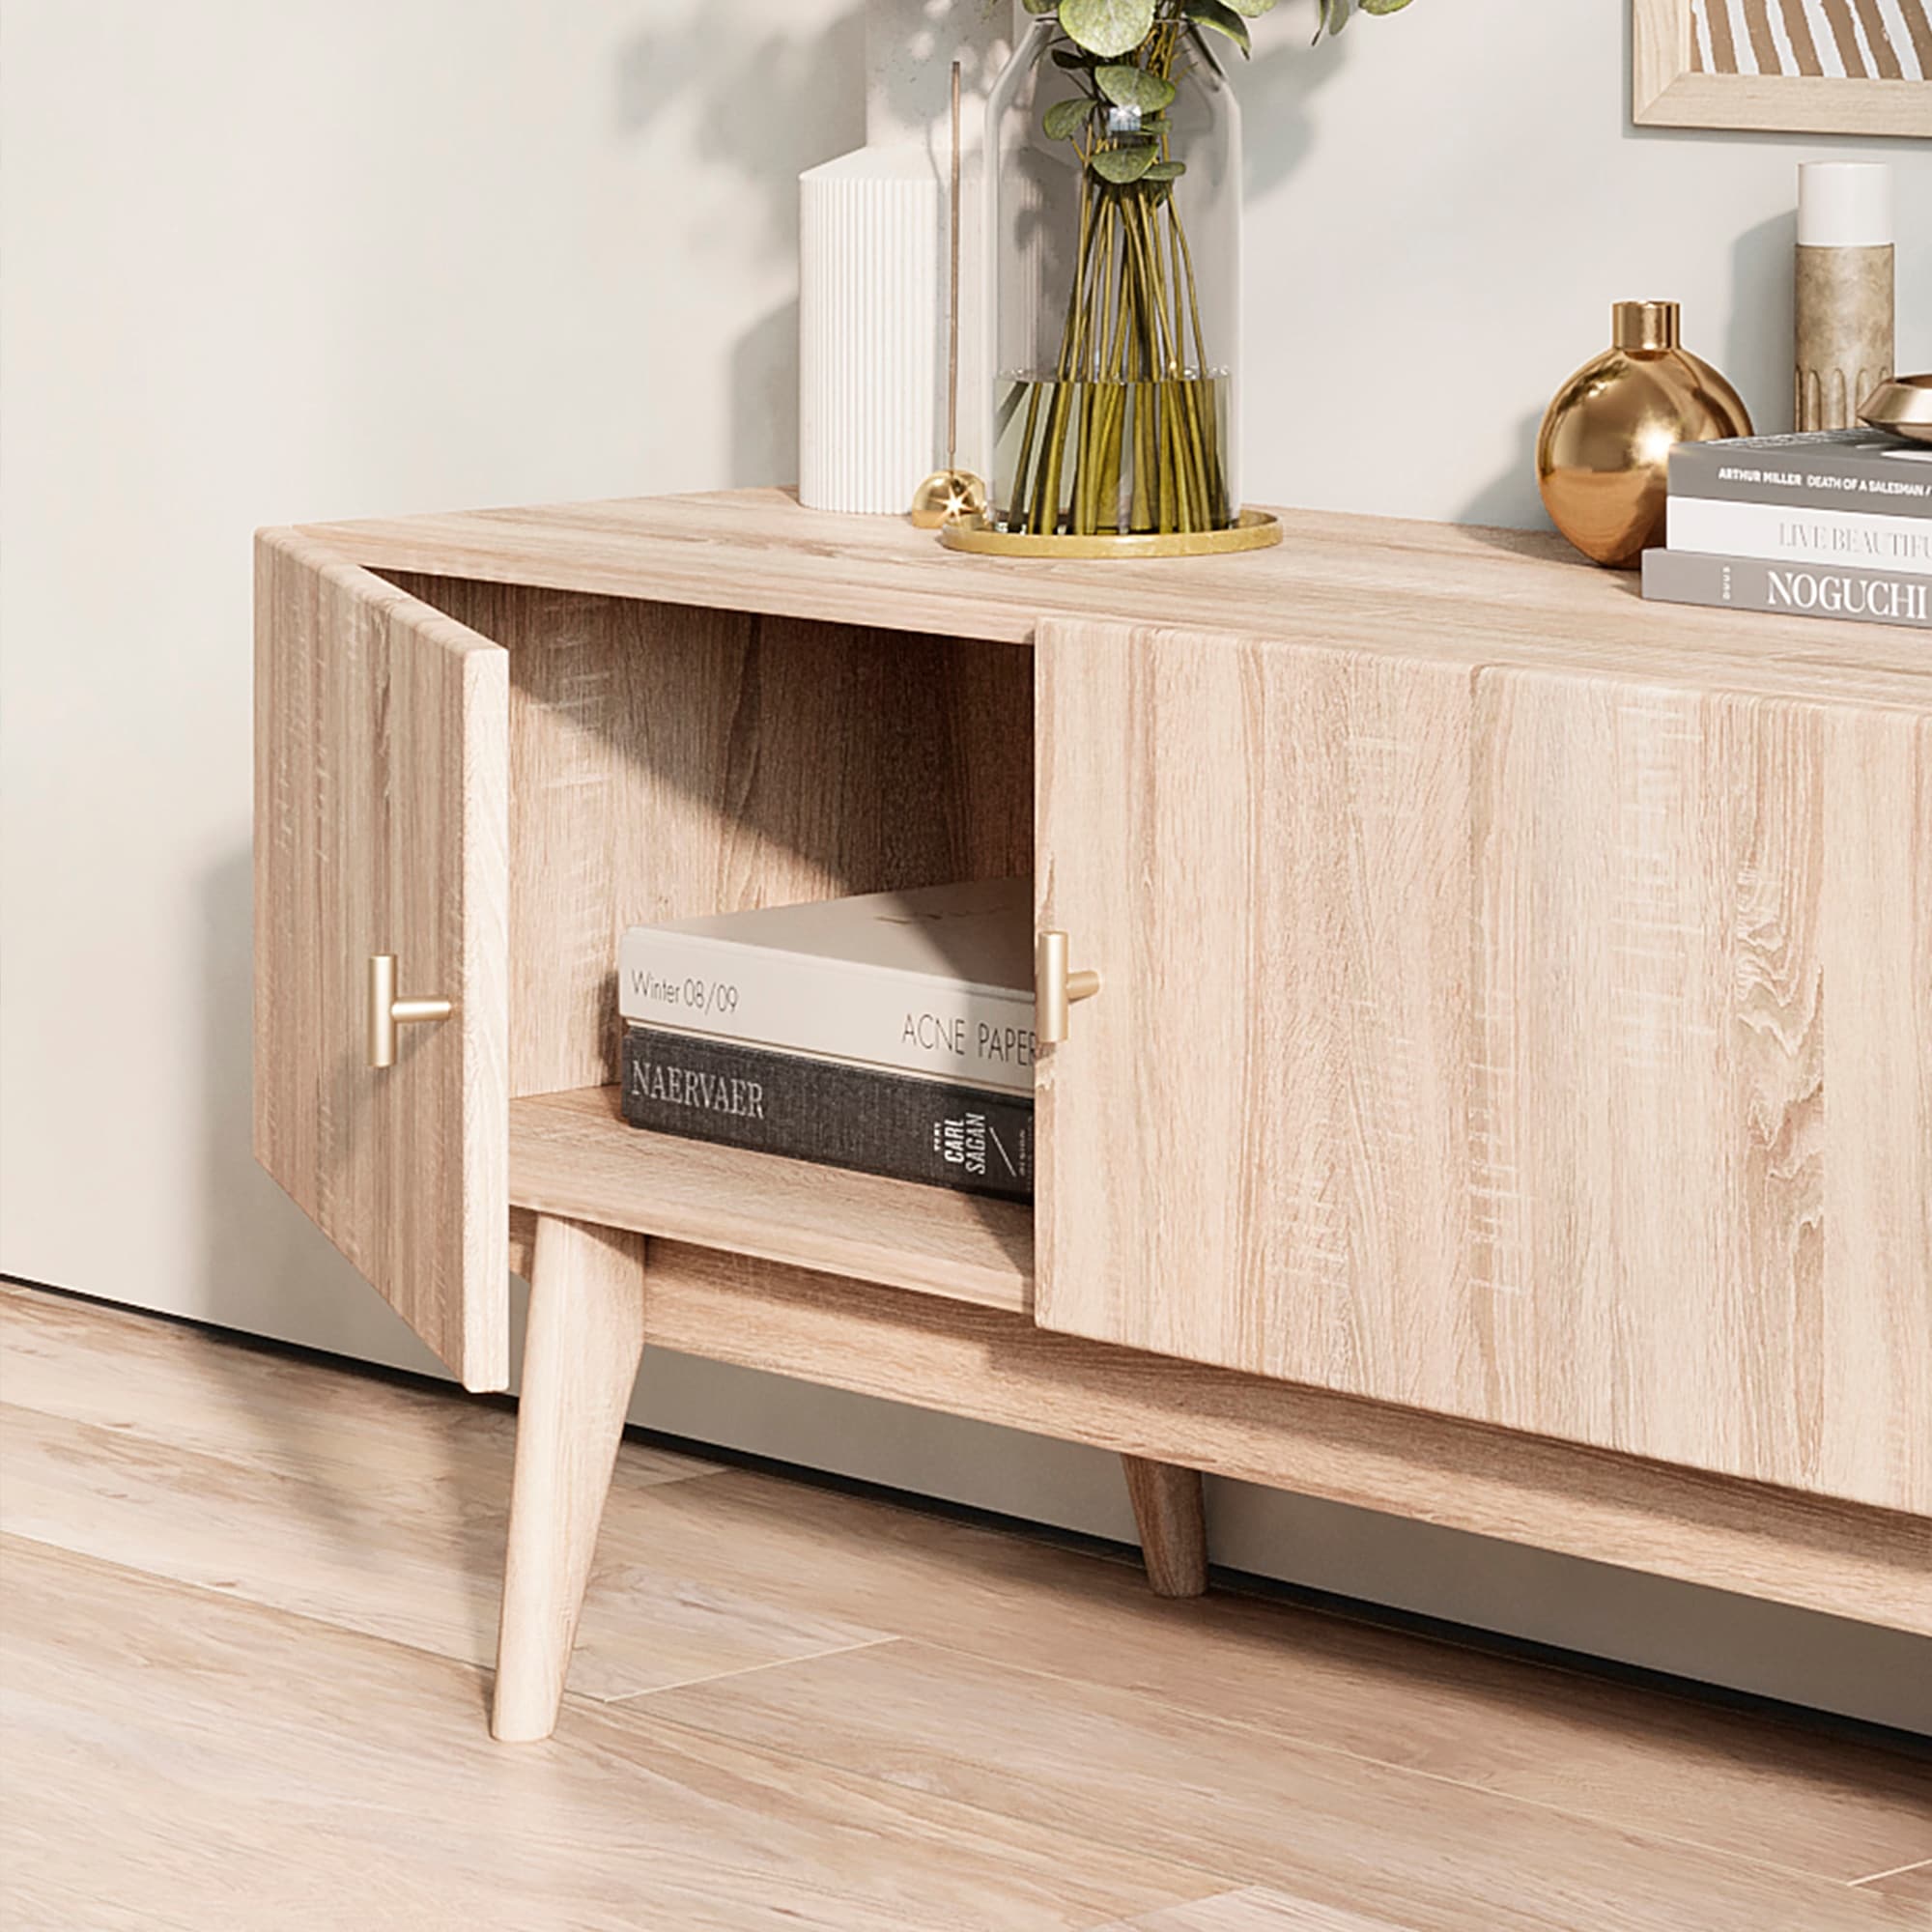 Living Skog Chelsea Brown TV Stand Fits for TV's up to 65 in. with Slatted Design and Wood Legs